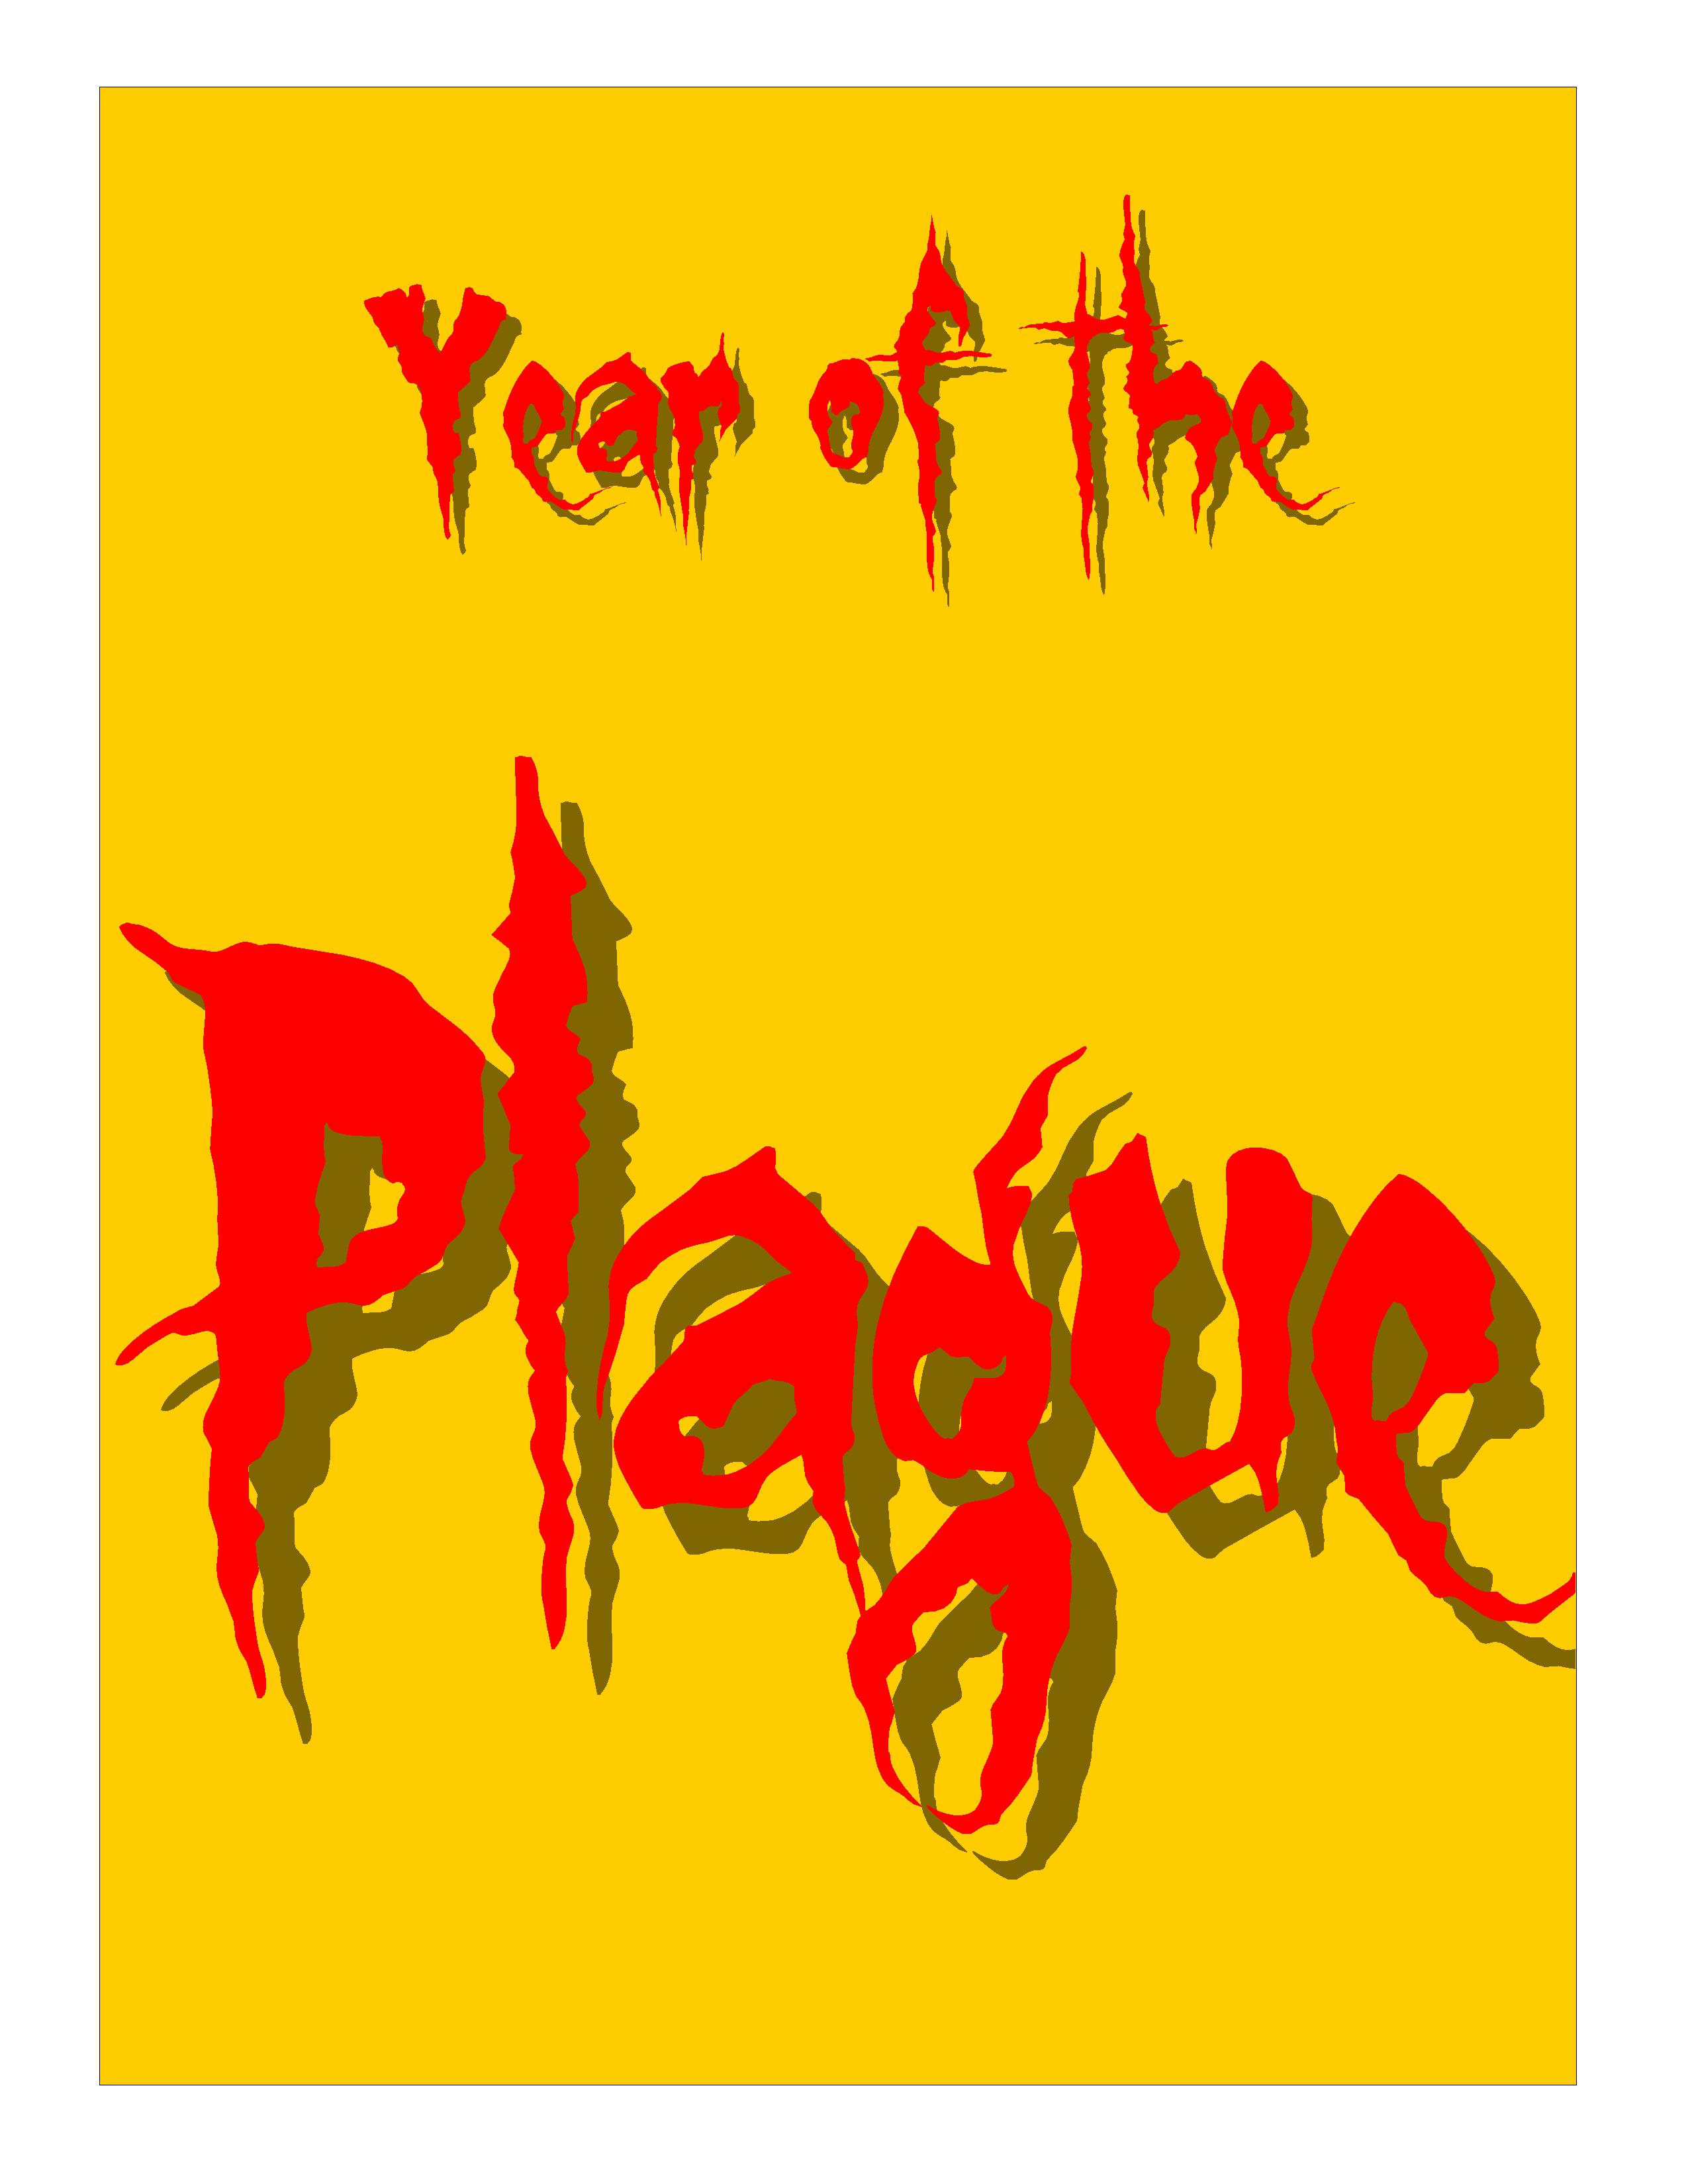 Year of the Plague